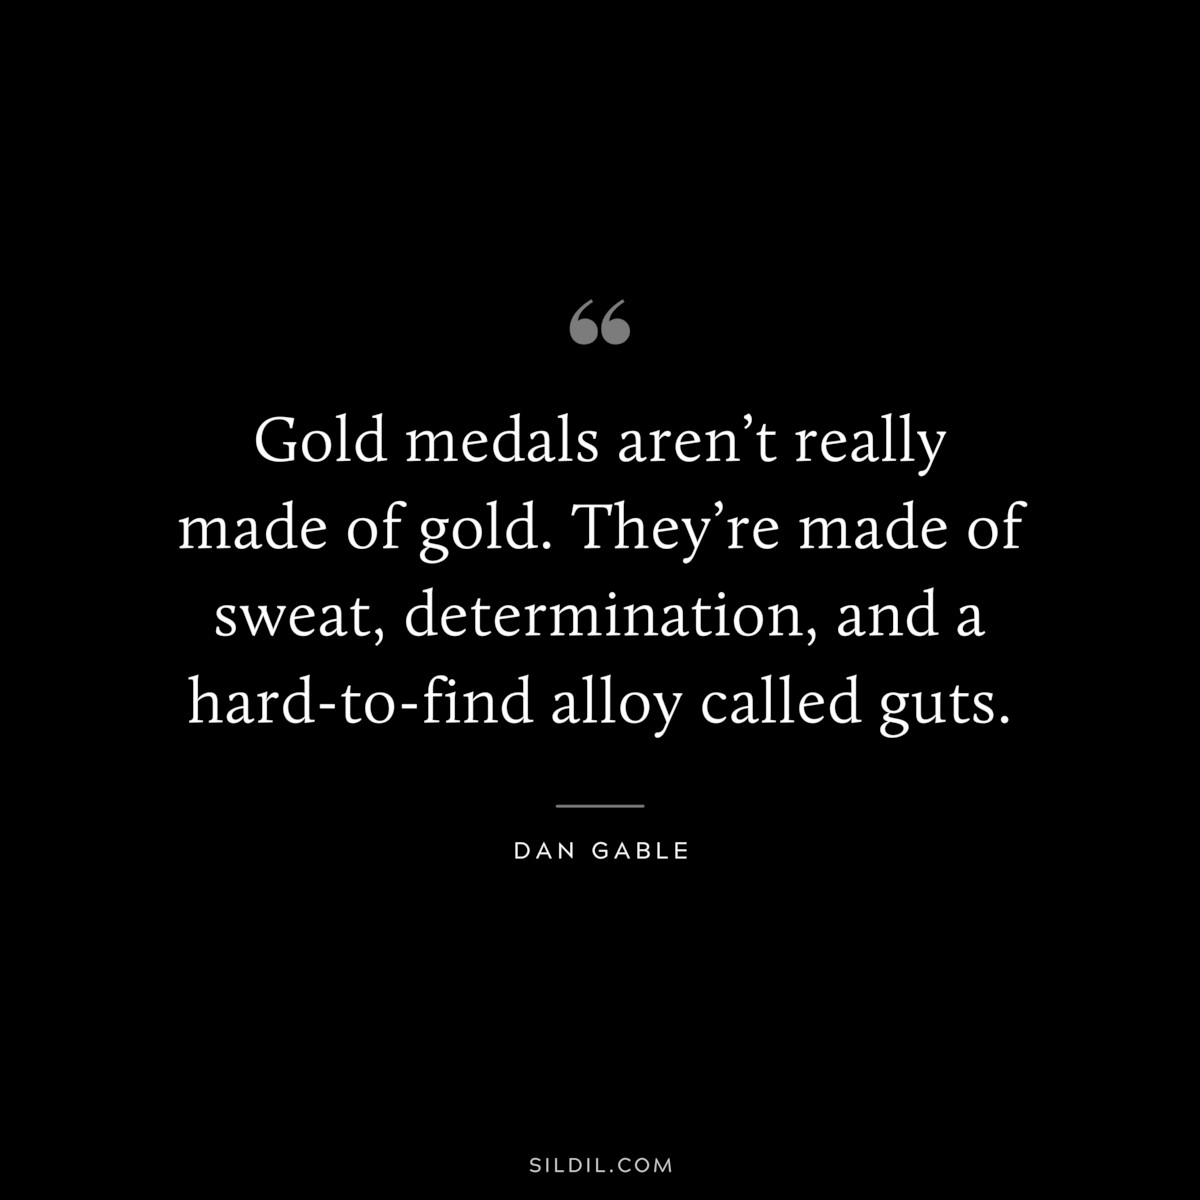 Gold medals aren’t really made of gold. They’re made of sweat, determination, and a hard-to-find alloy called guts. ― Dan Gable